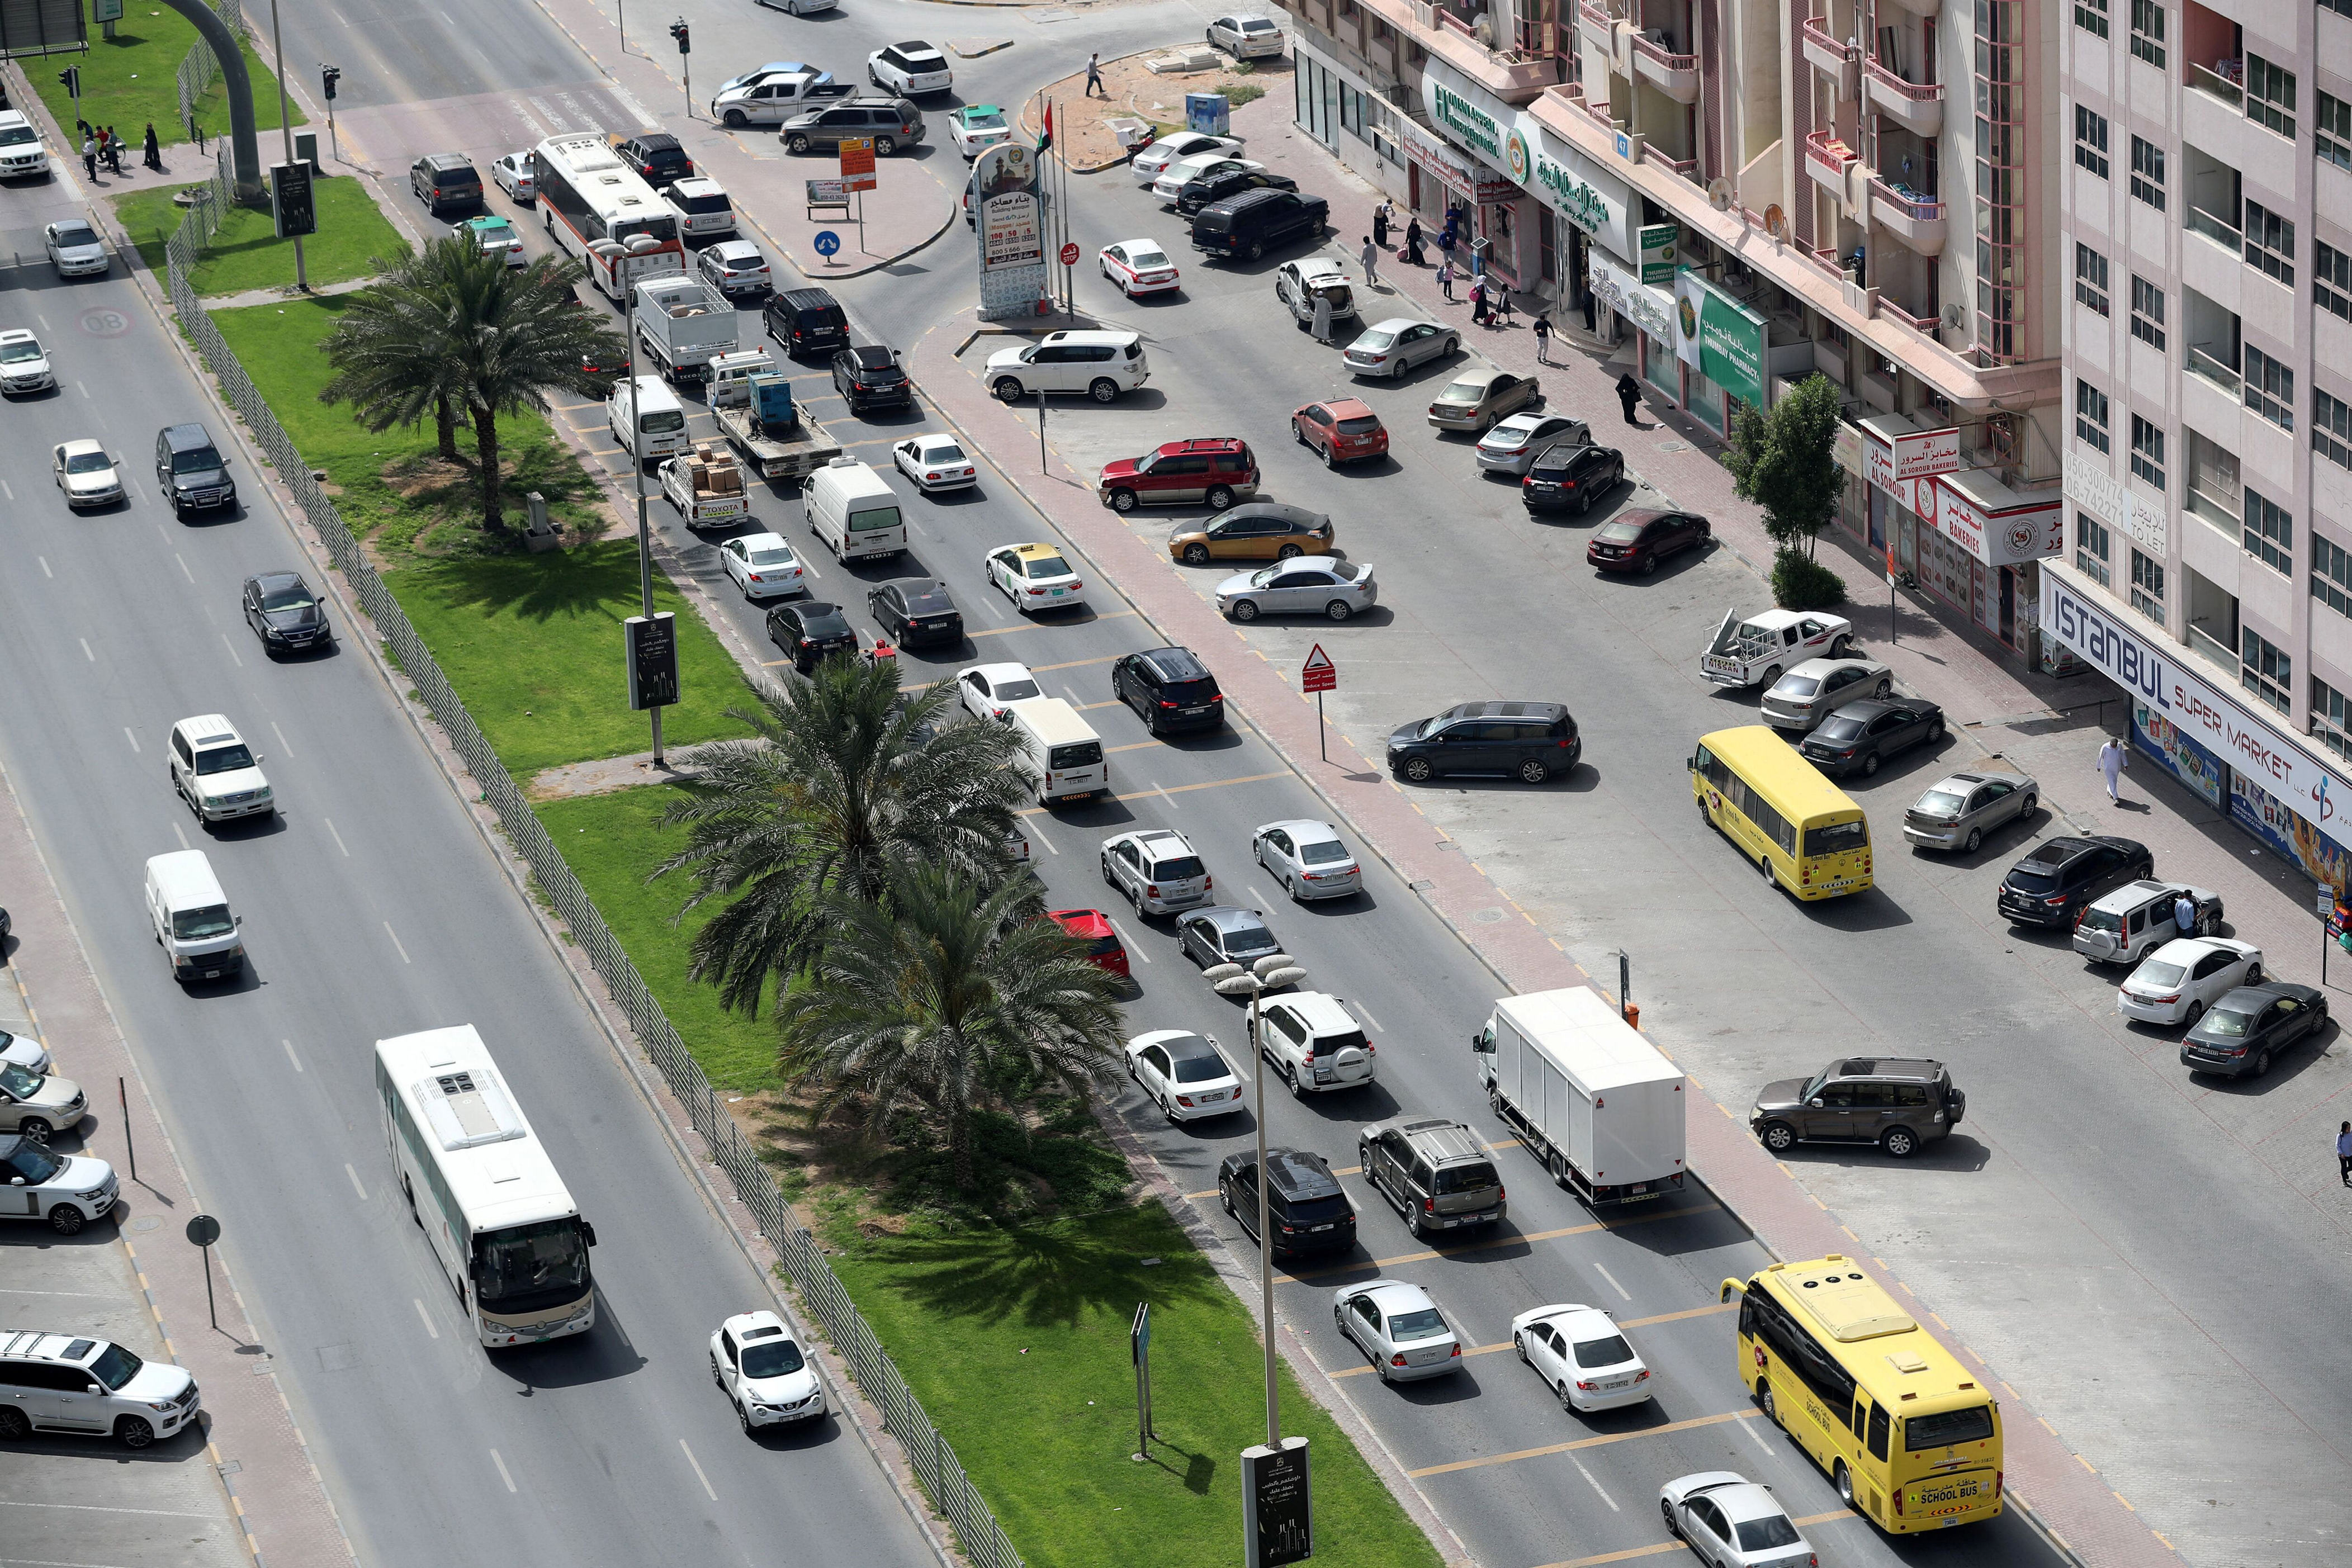 drivers in ajman urged to turn engines off at red lights to cut pollution